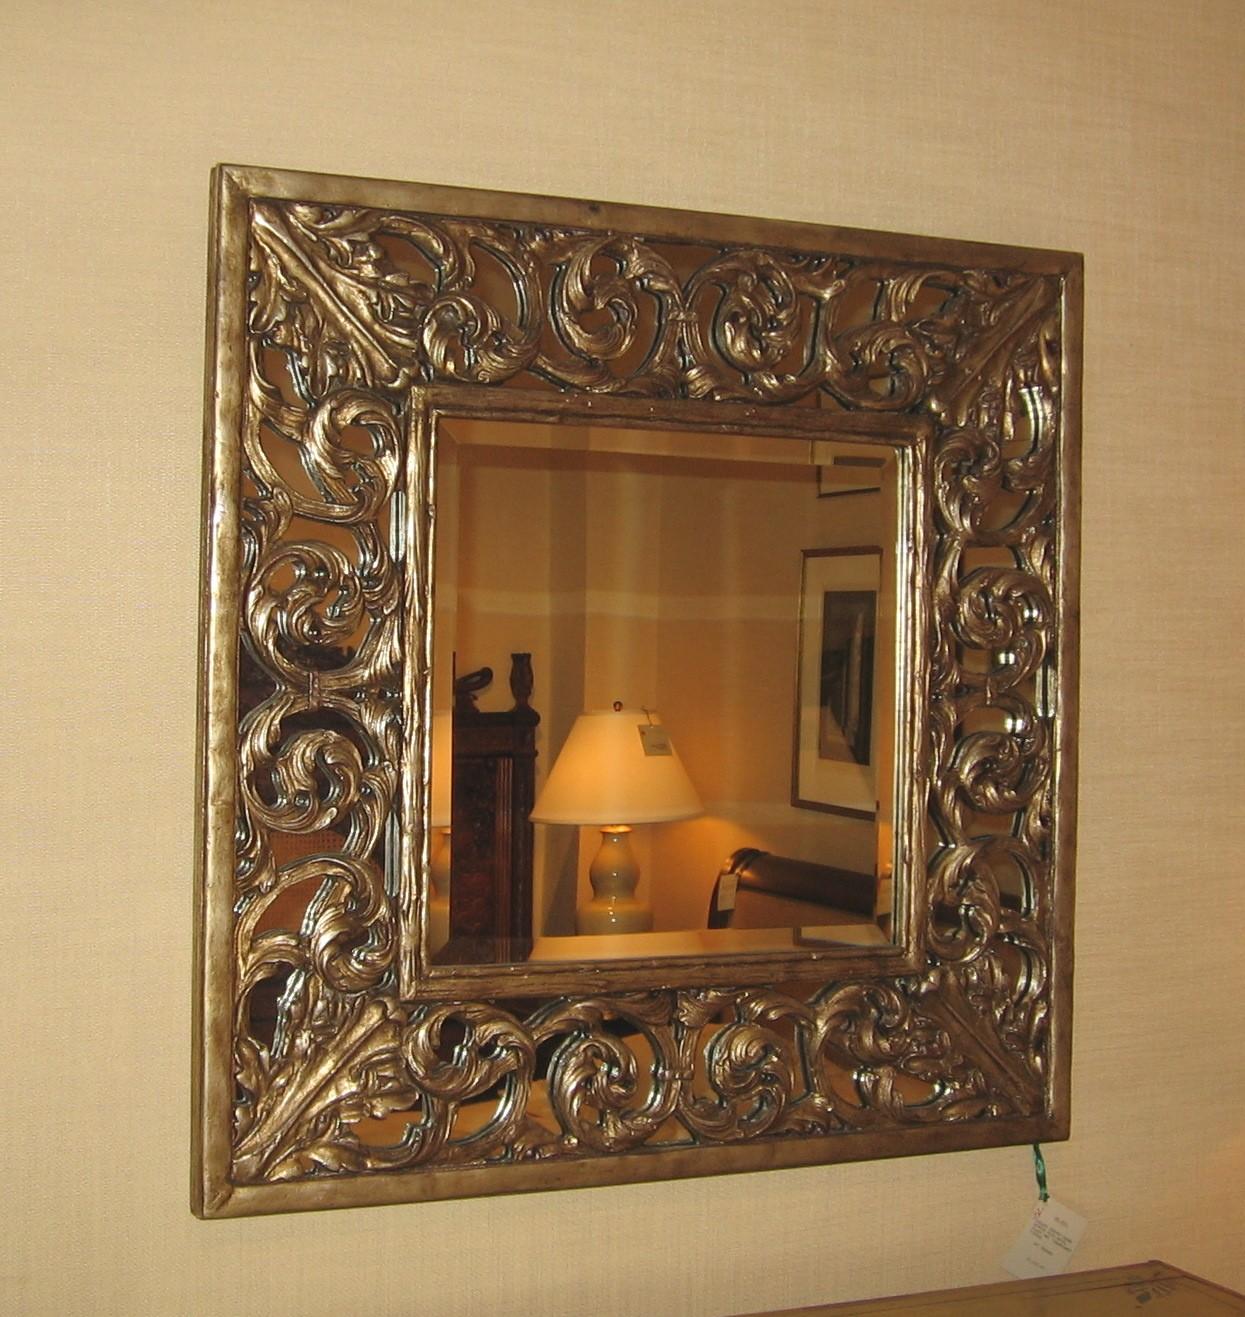 Delightful and Elegant Transitional Wood Square Mirror with Carved Frame Based on a Filigree Lattice of Curled Feathers with a Champaign Painted Finish and Bevel Mirror.  

36